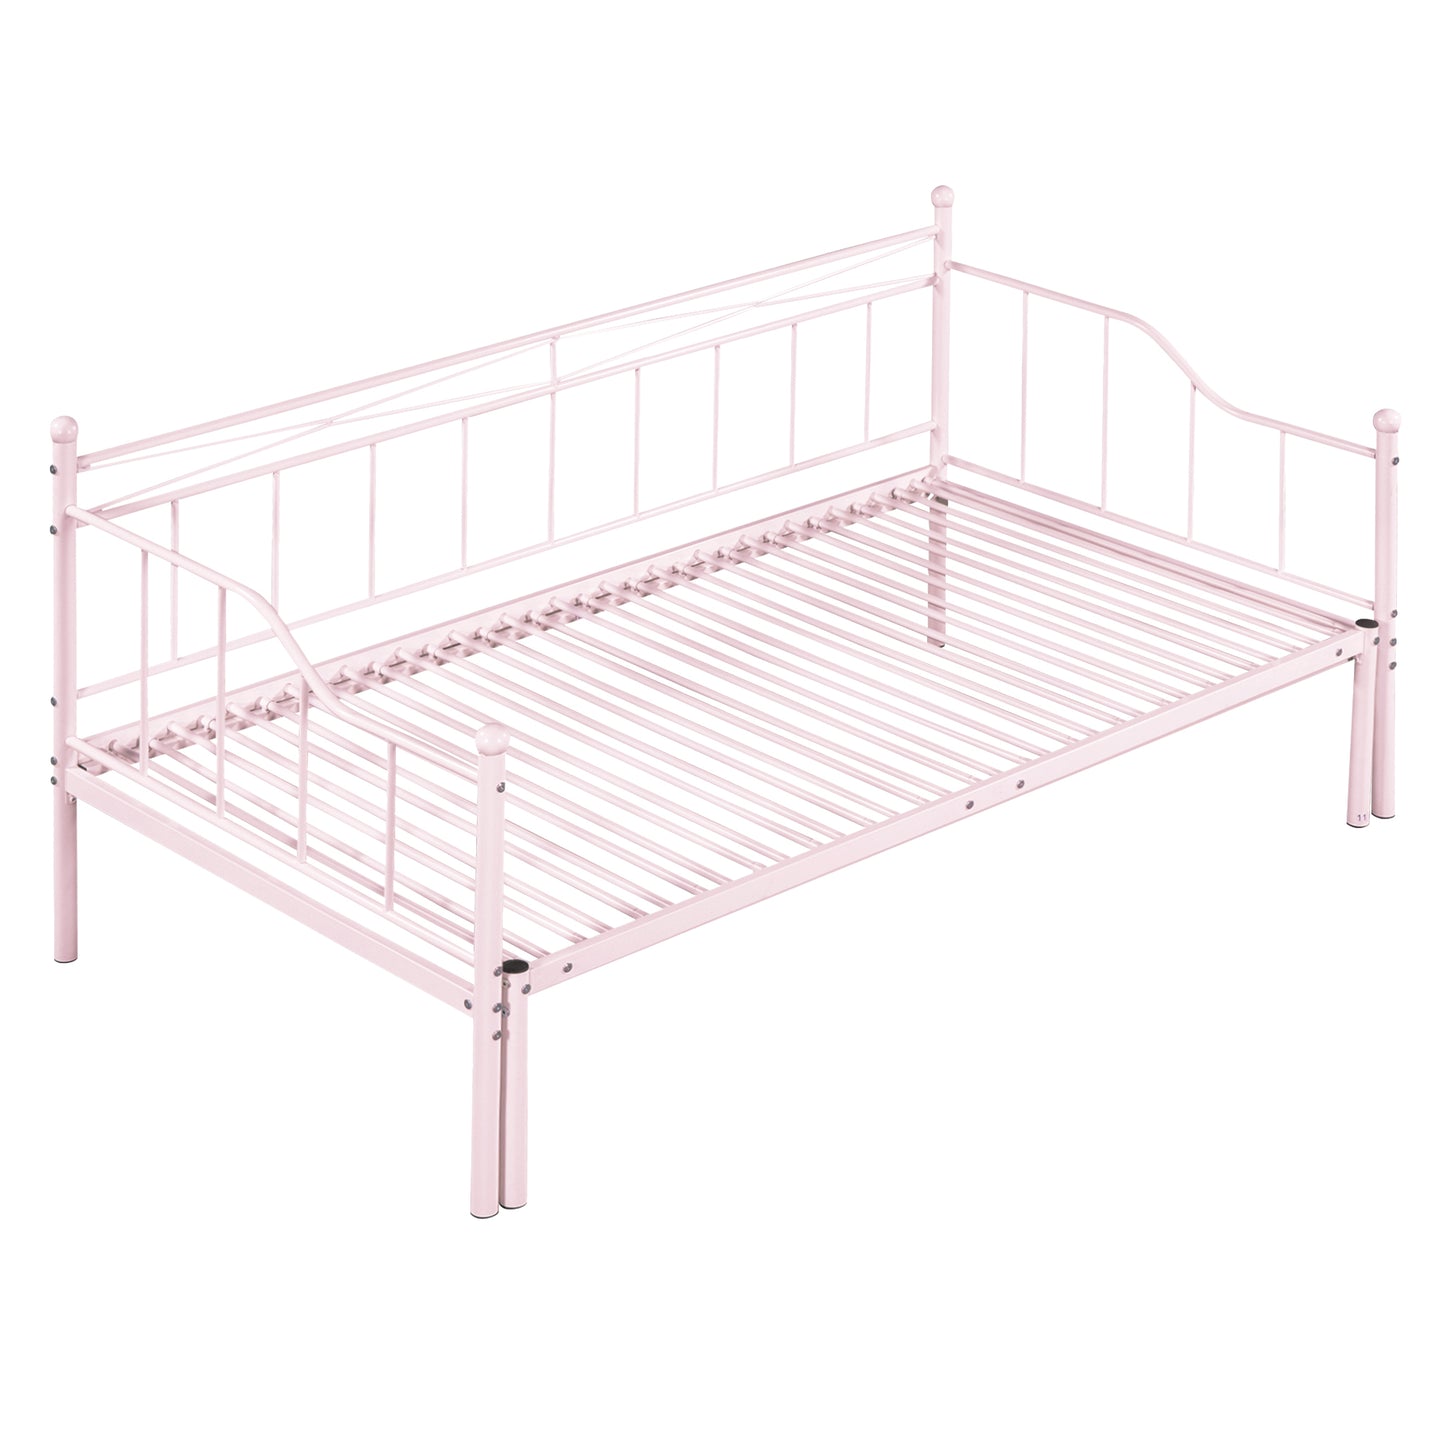 HSUNNS Twin Size Metal Frame Daybed with Pullout Trundle, Heavy Duty Steel Slat Support Sofa Bed Trundle Bed for Kids Boys Girls Teens Adults Guests, No Spring Box Needed, Pink